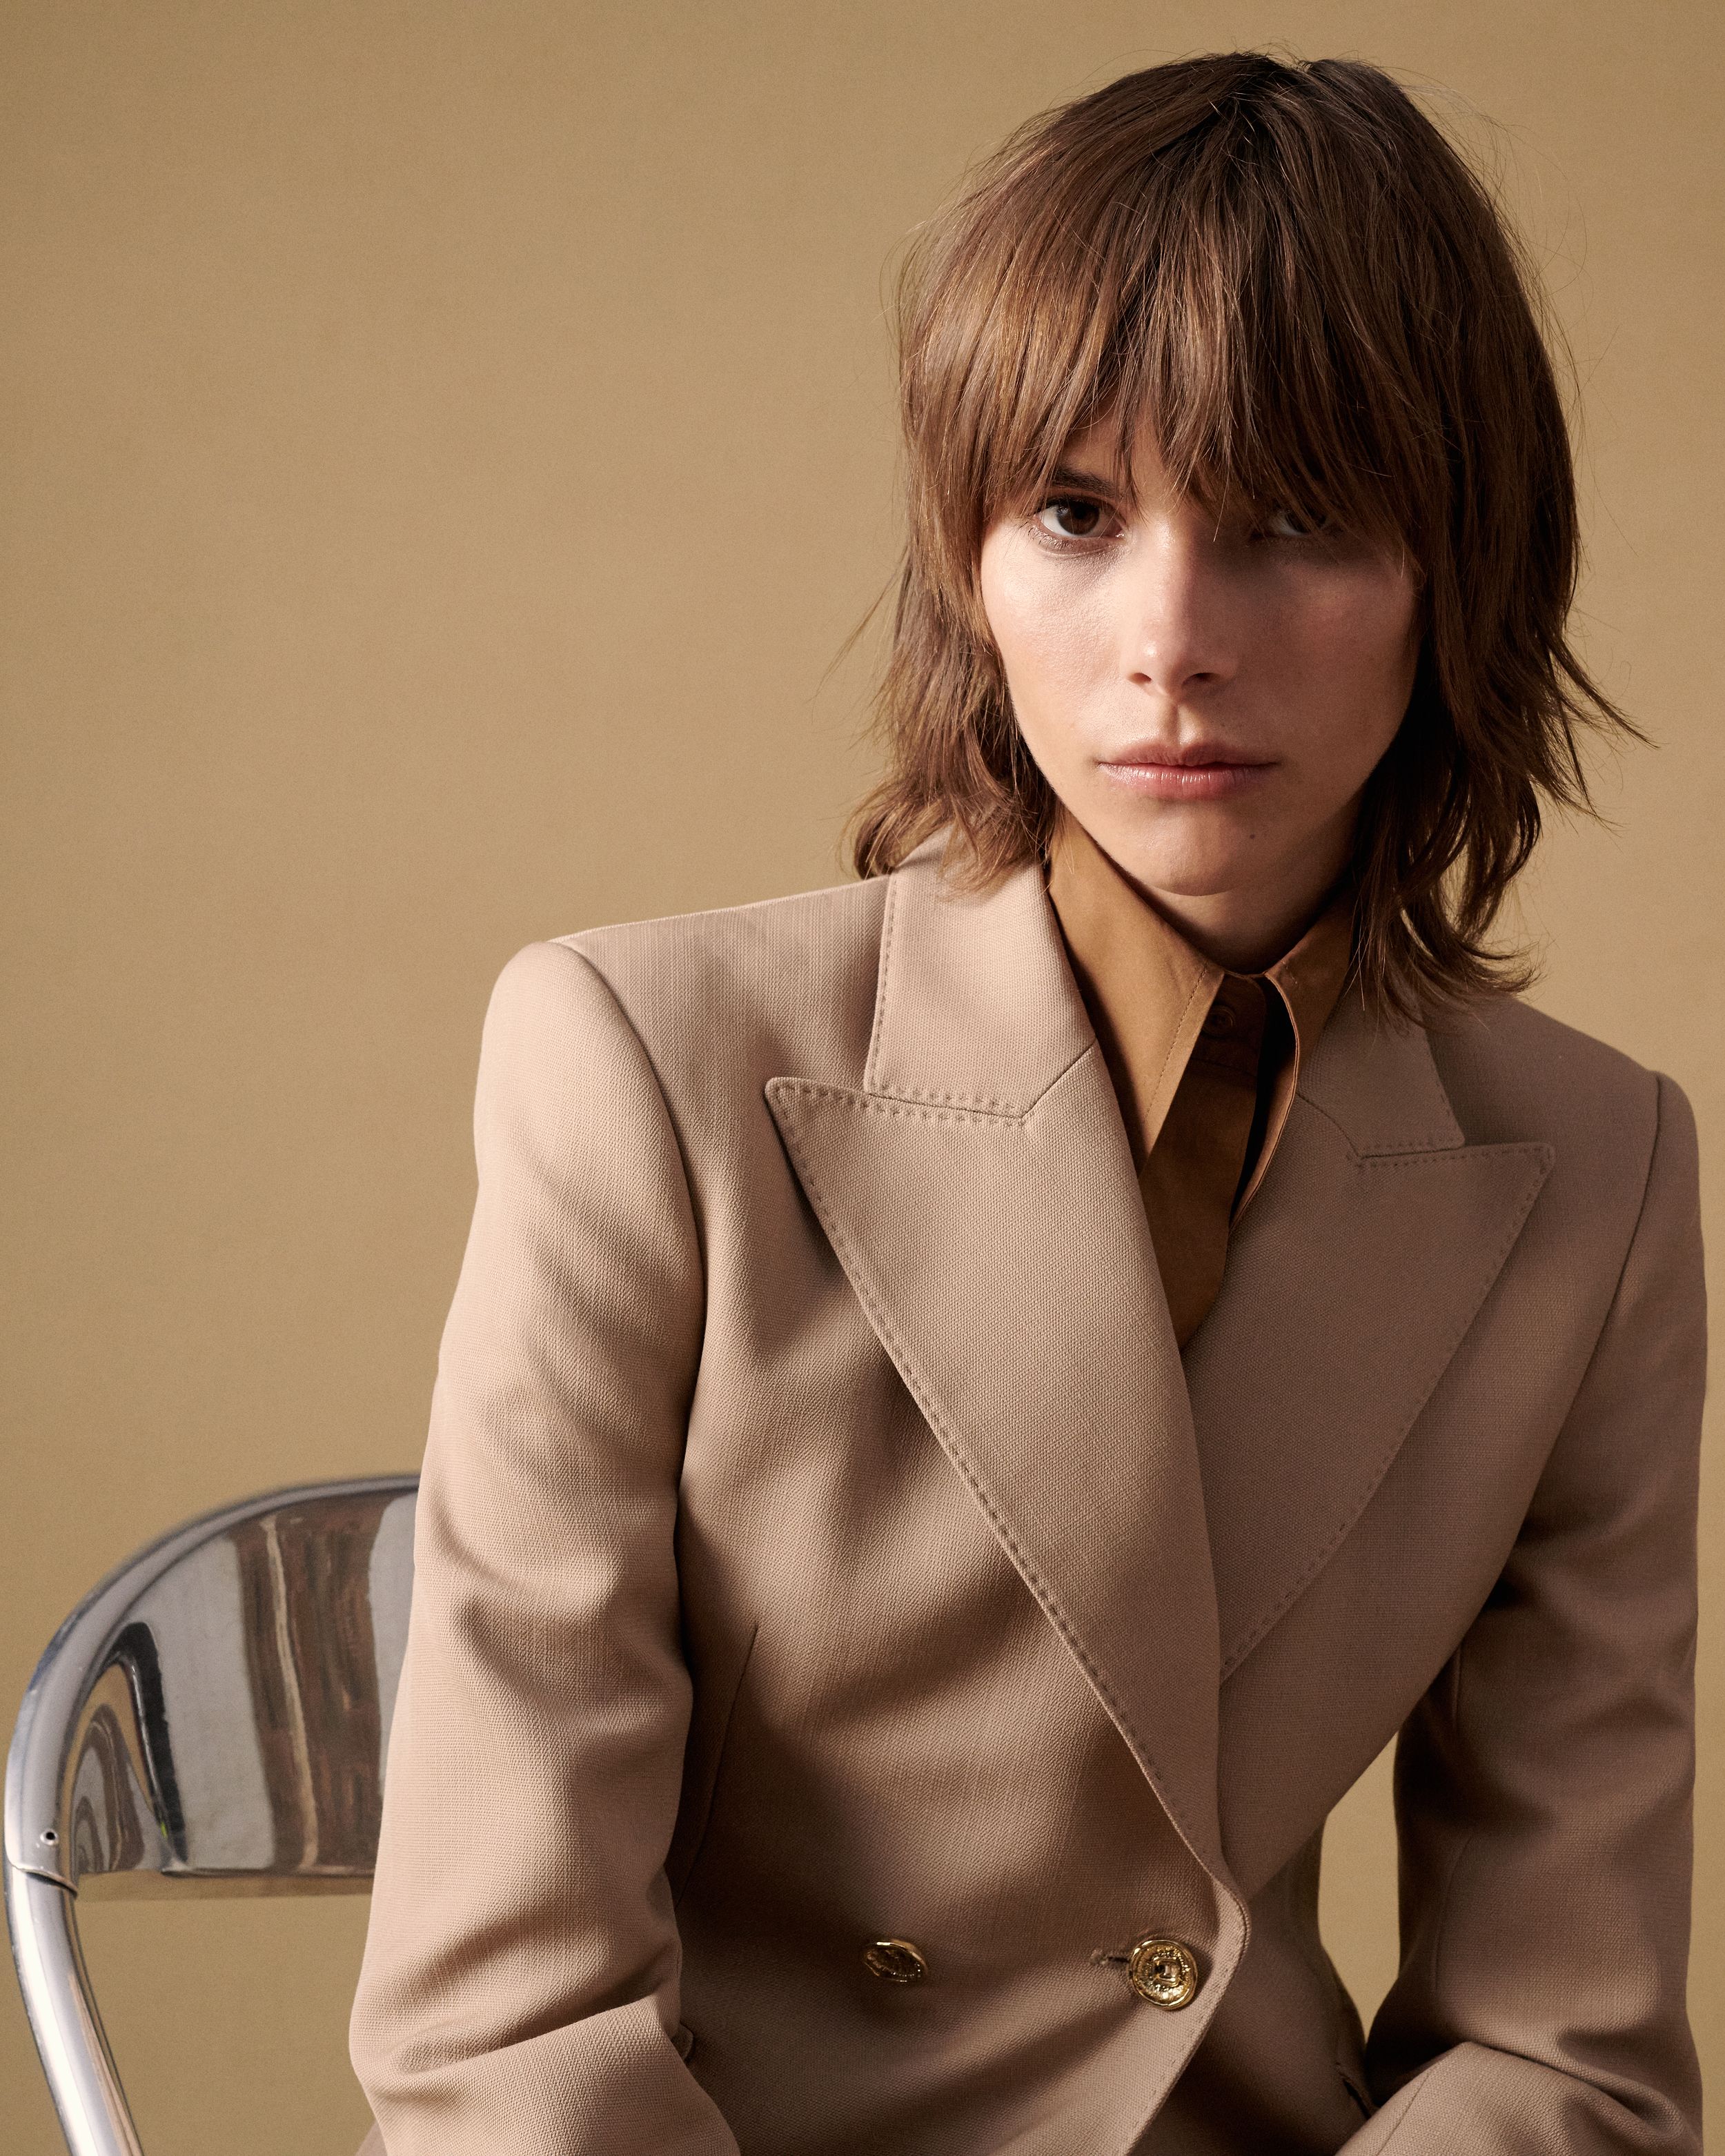 Model sitting in a chair wearing a neutral-toned jacket and collared shirt